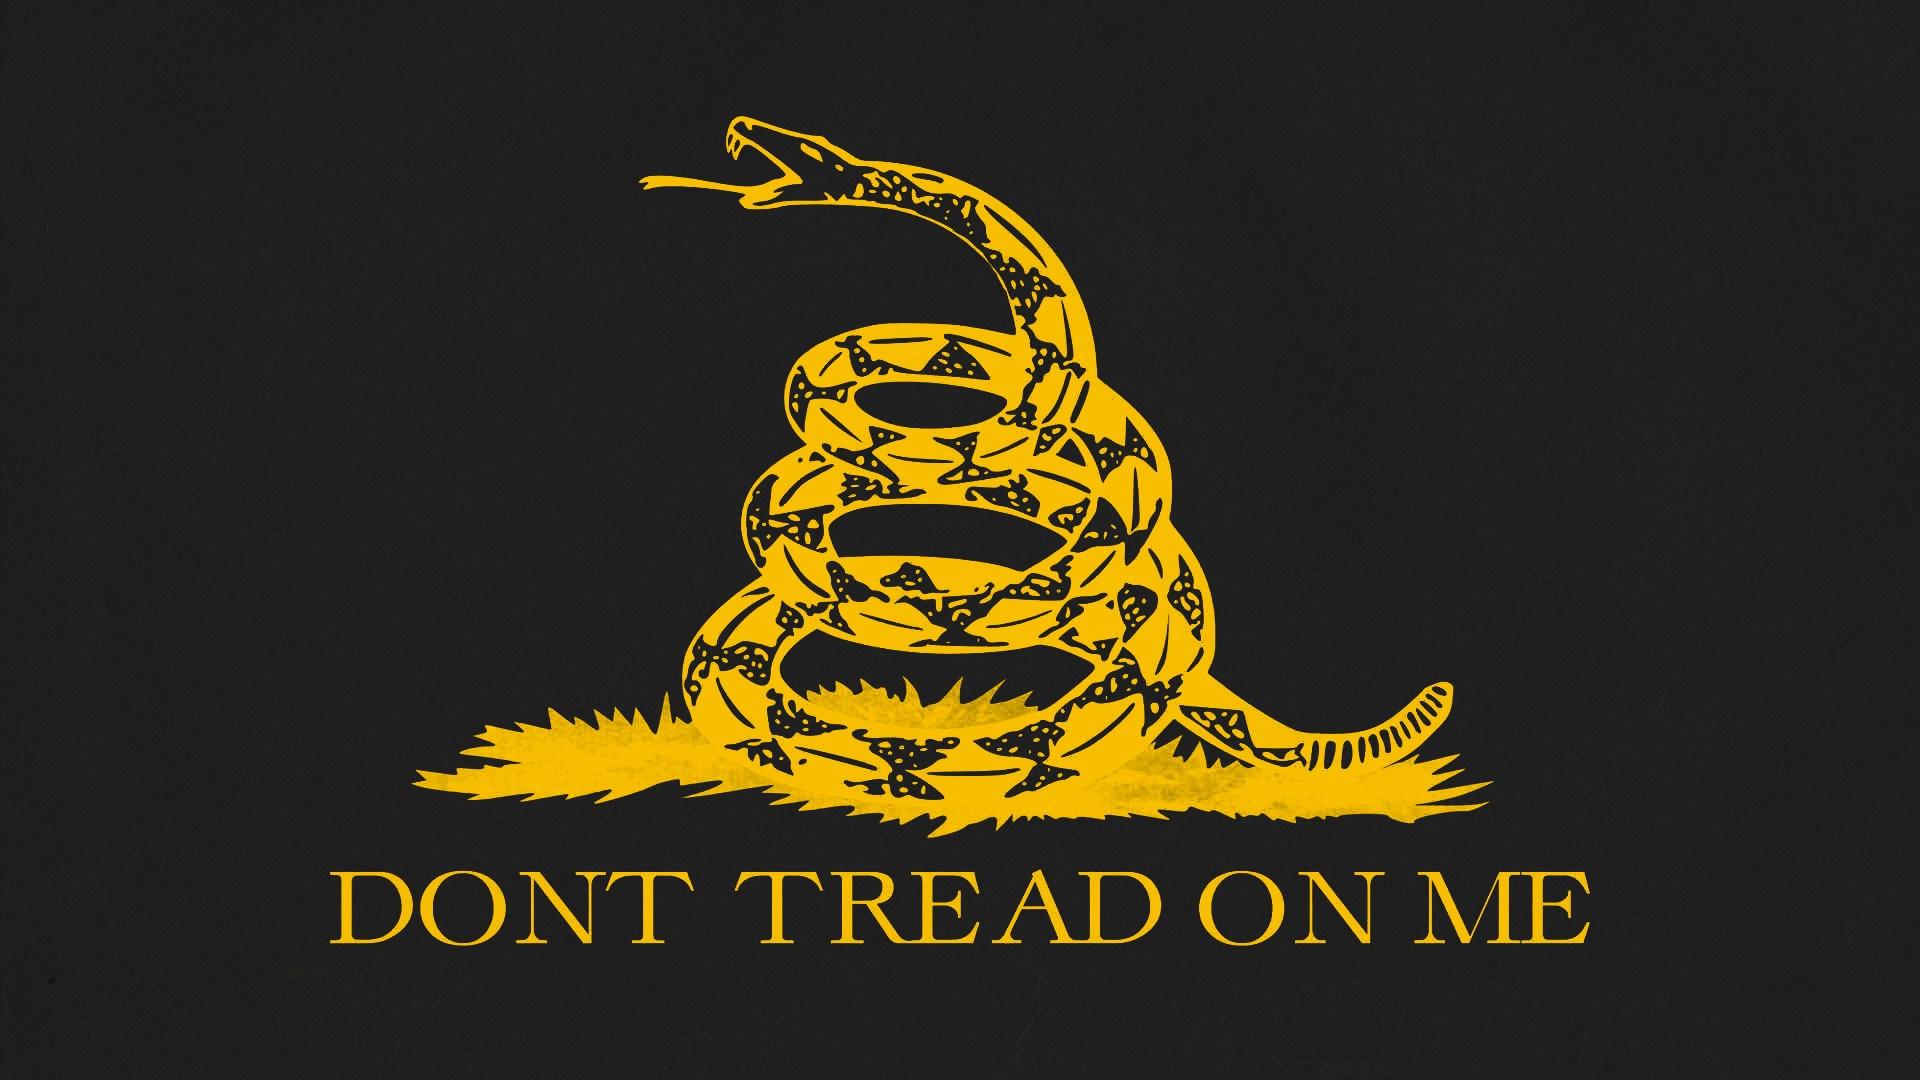 Dont tread on me phone wallpaper